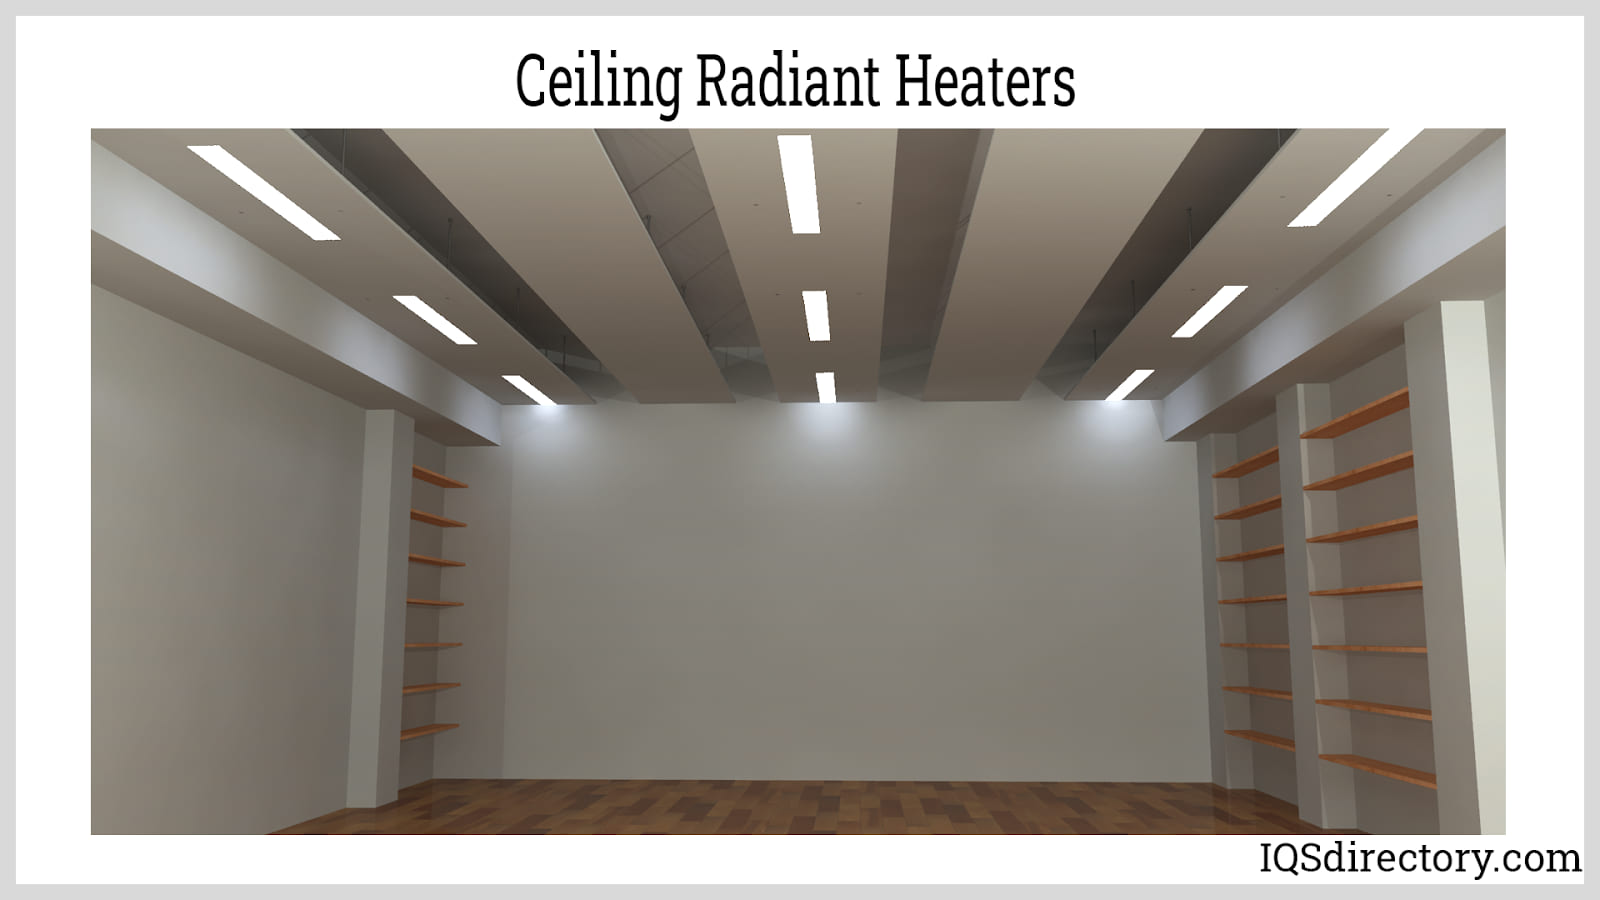 Ceiling Radiant Heaters